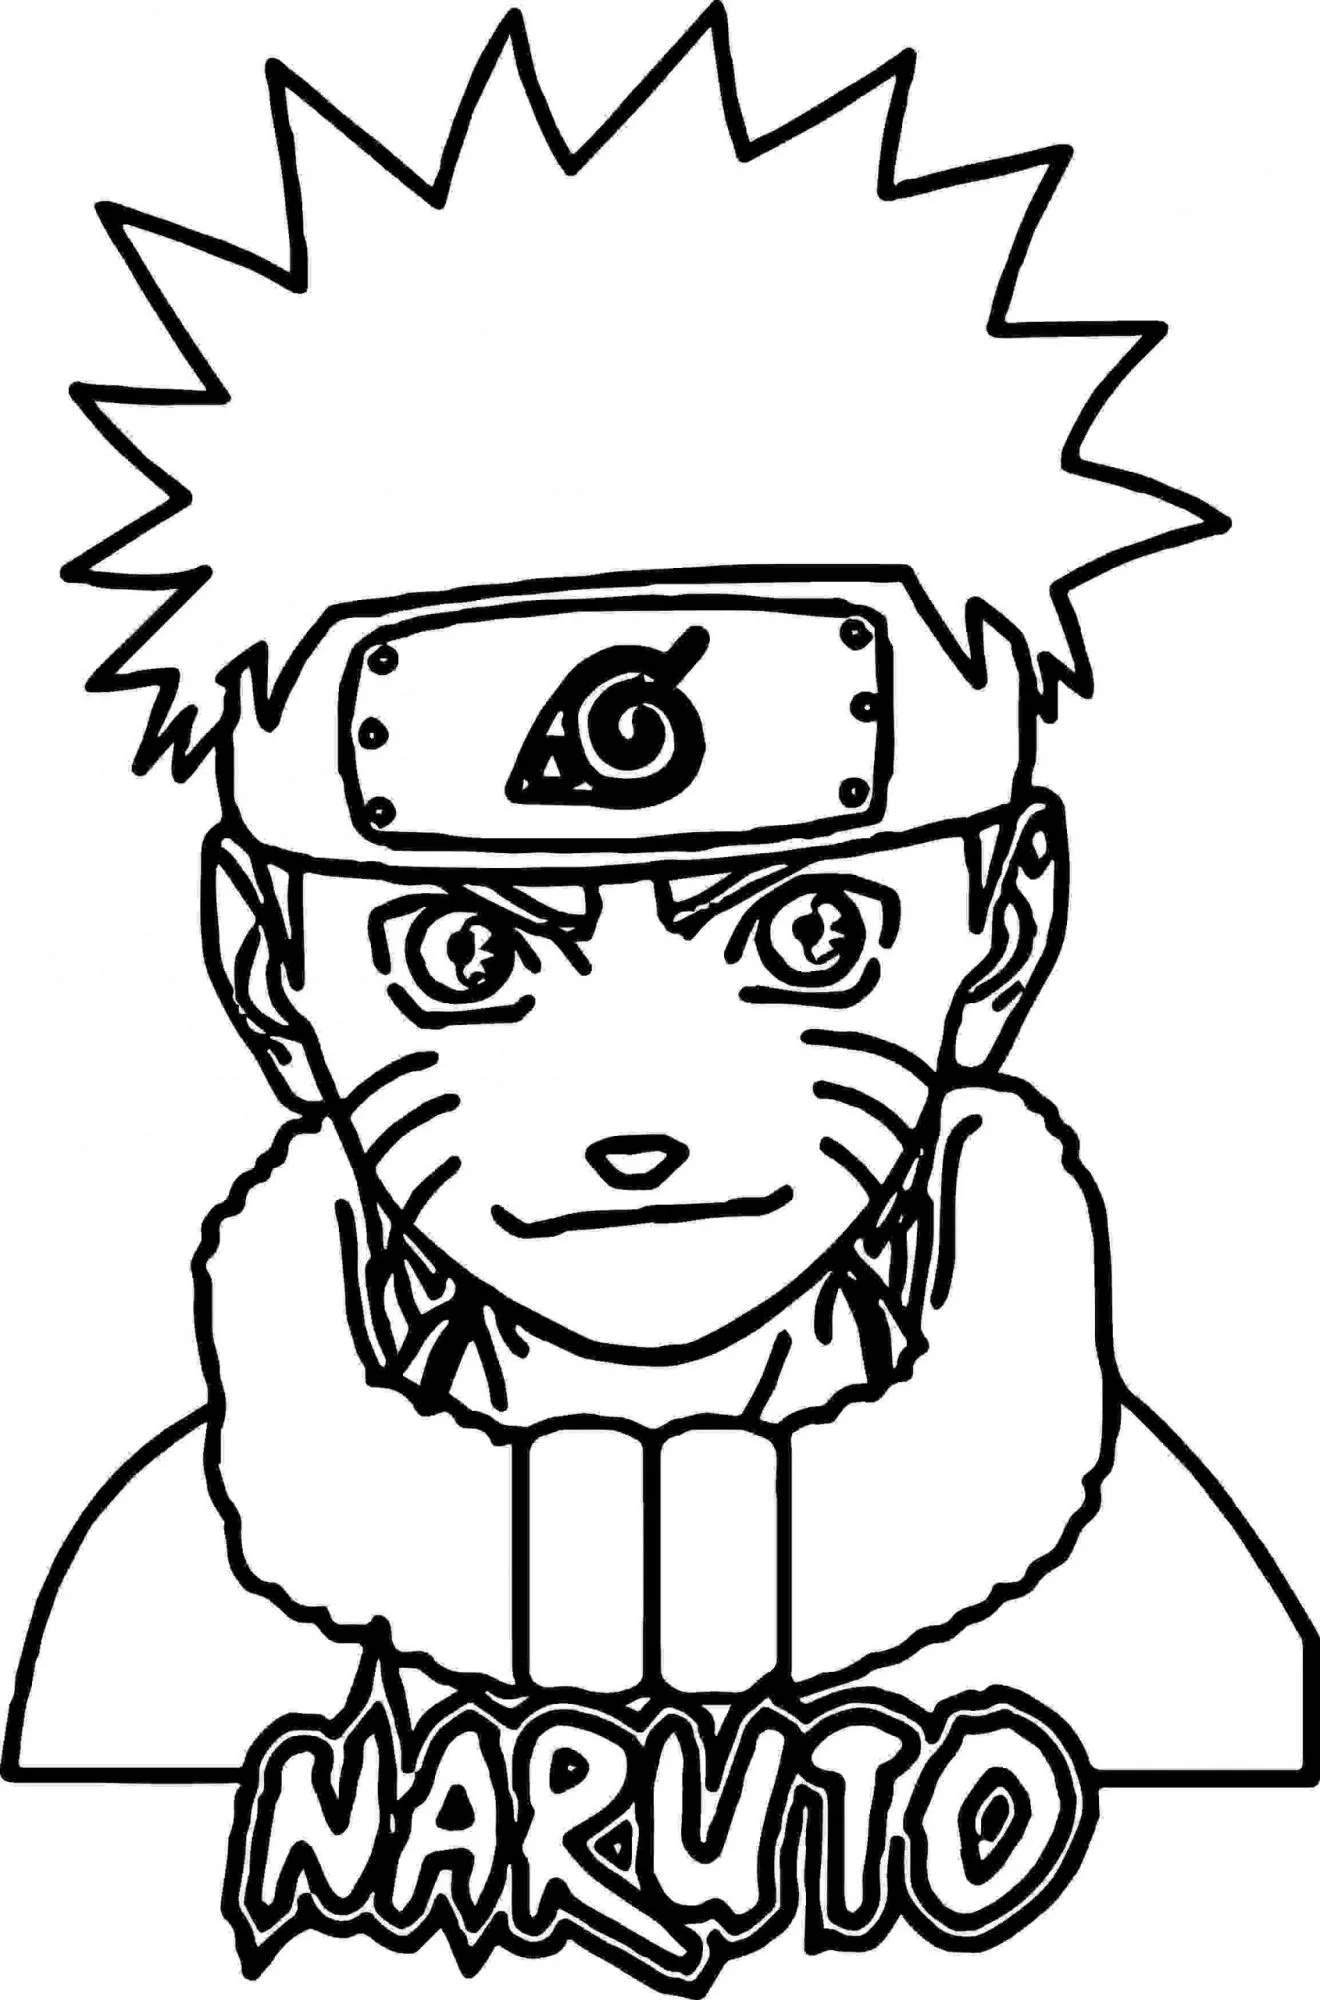 Naruto in childhood from Naruto